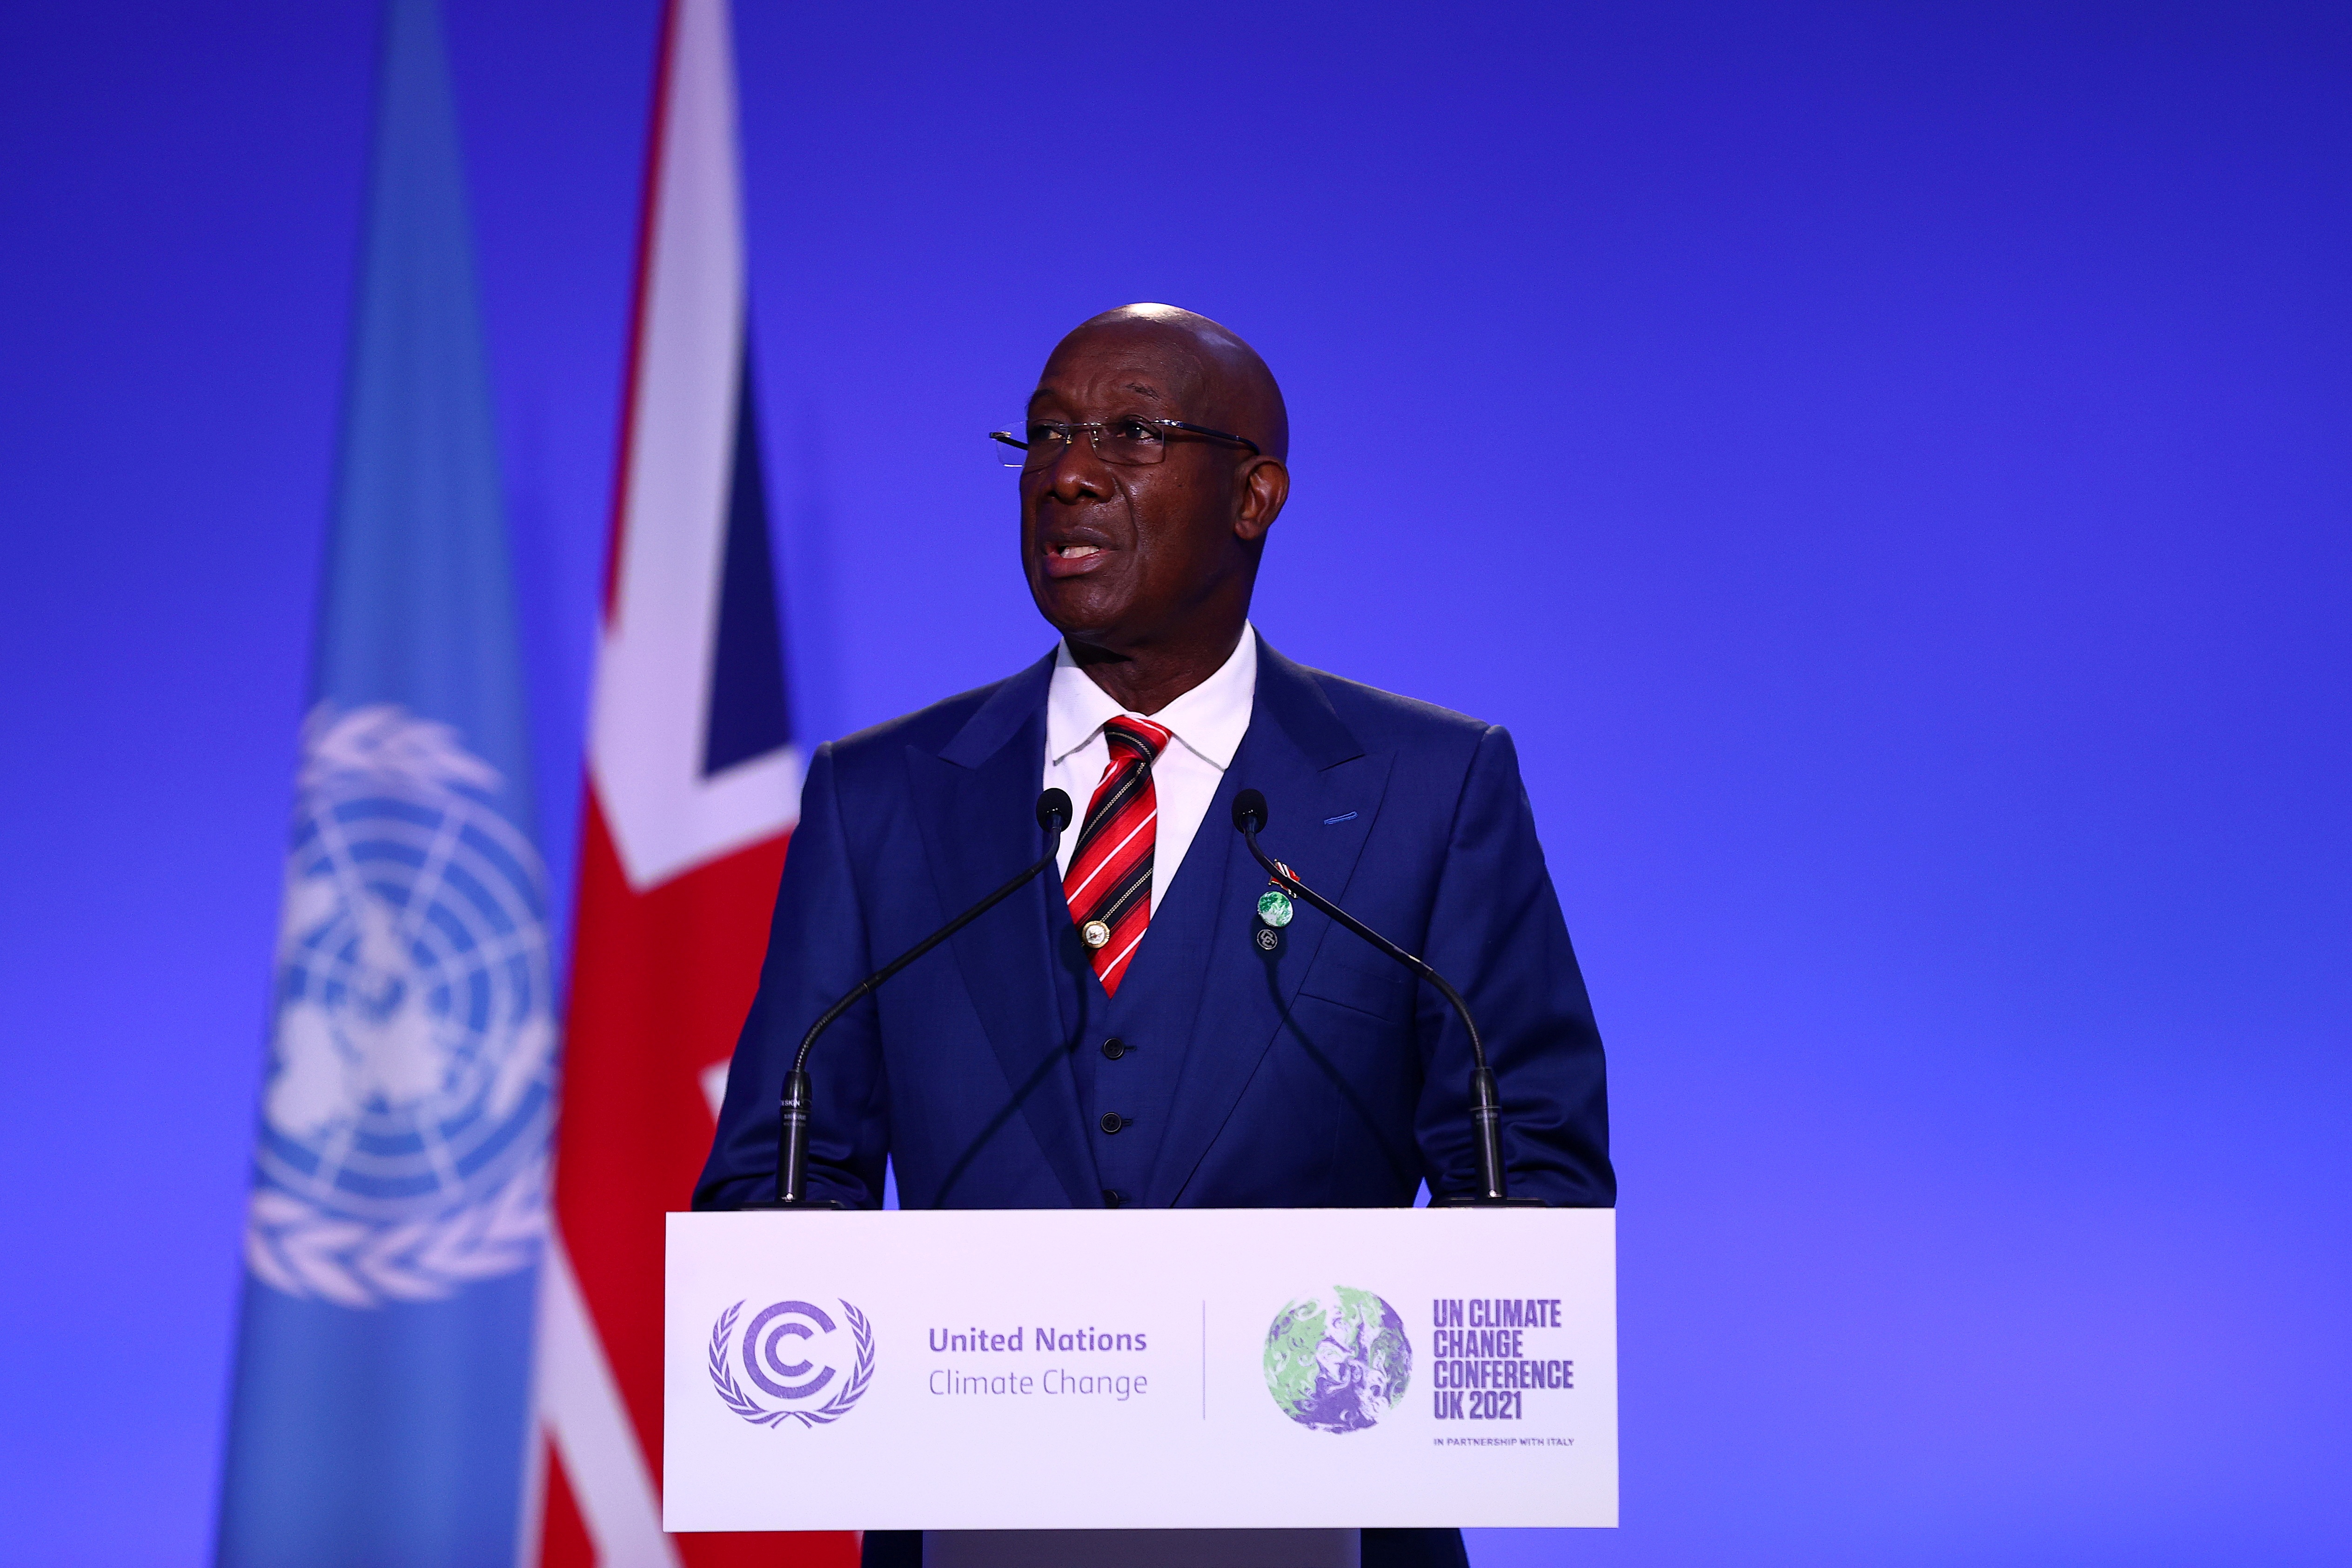 Trinidad and Tobago's Prime Minister Keith Rowley speaks during the UN Climate Change Conference (COP26) in Glasgow, Scotland, Britain, November 2, 2021. Adrian Dennis/Pool via REUTERS